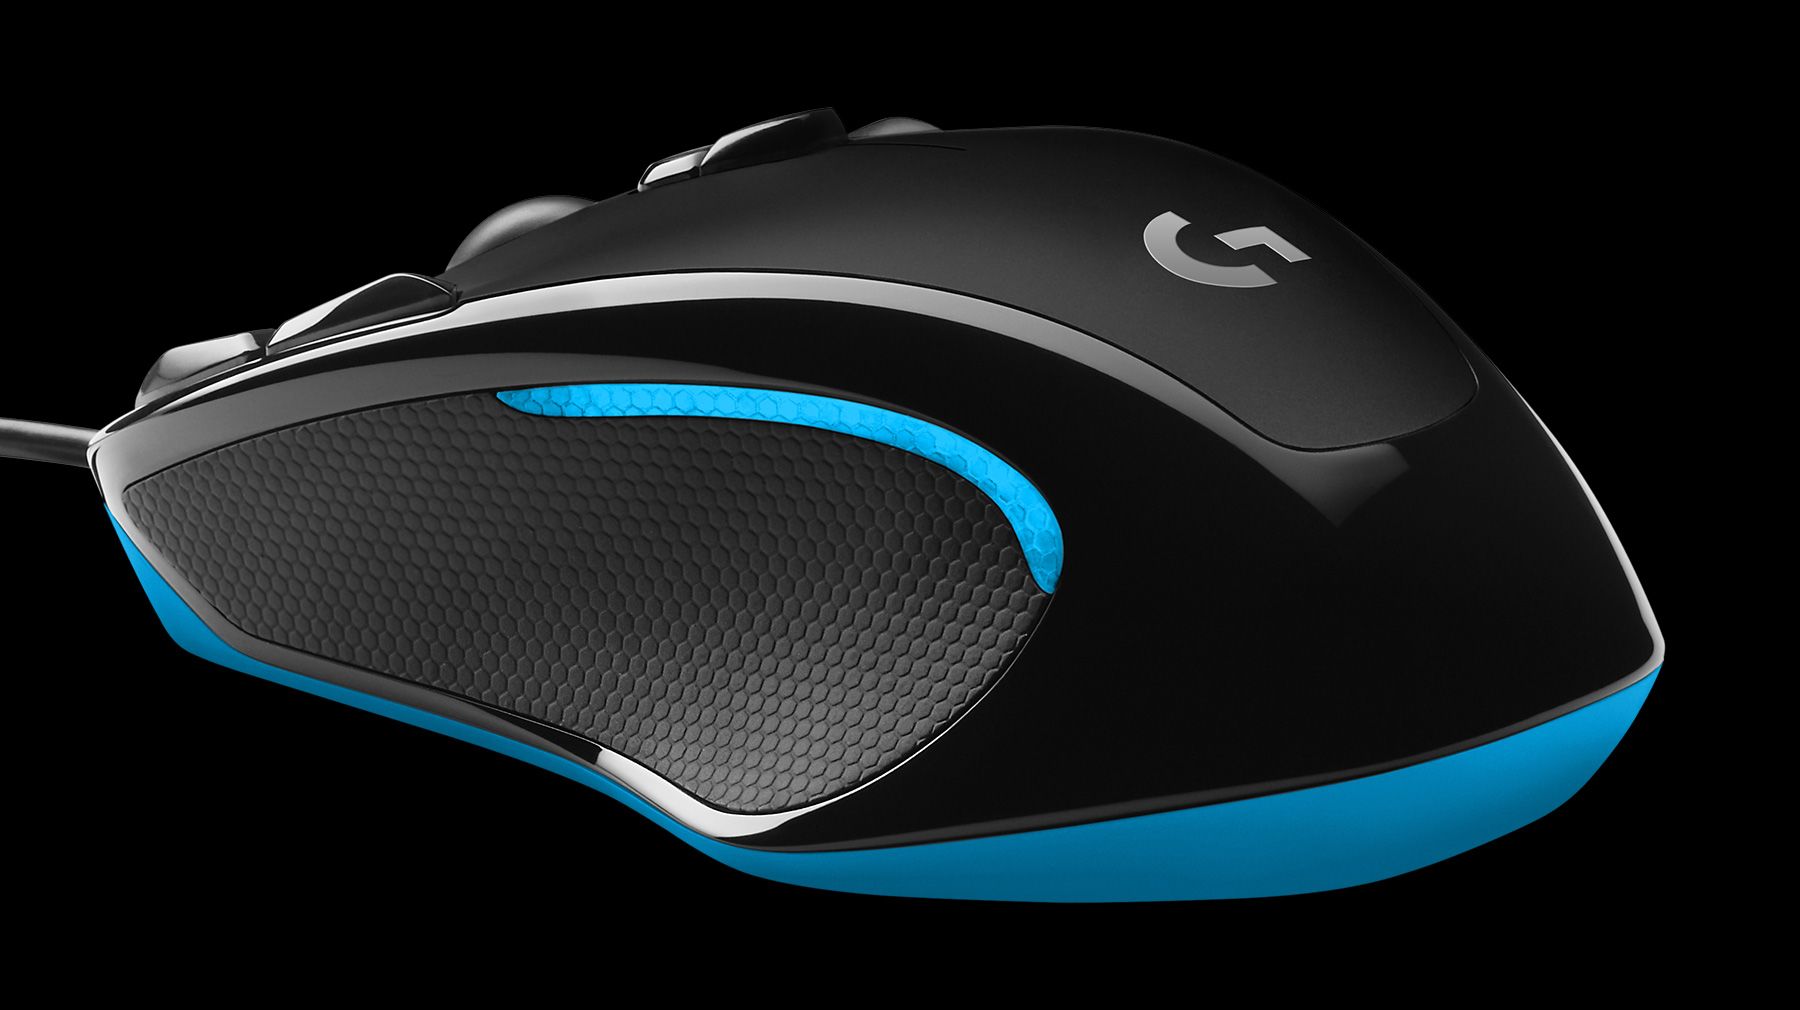 Logitech G300s Optical Ambidextrous Gaming Mouse 9 Programmable Buttons Buy Online At Best Prices In Pakistan Daraz Pk